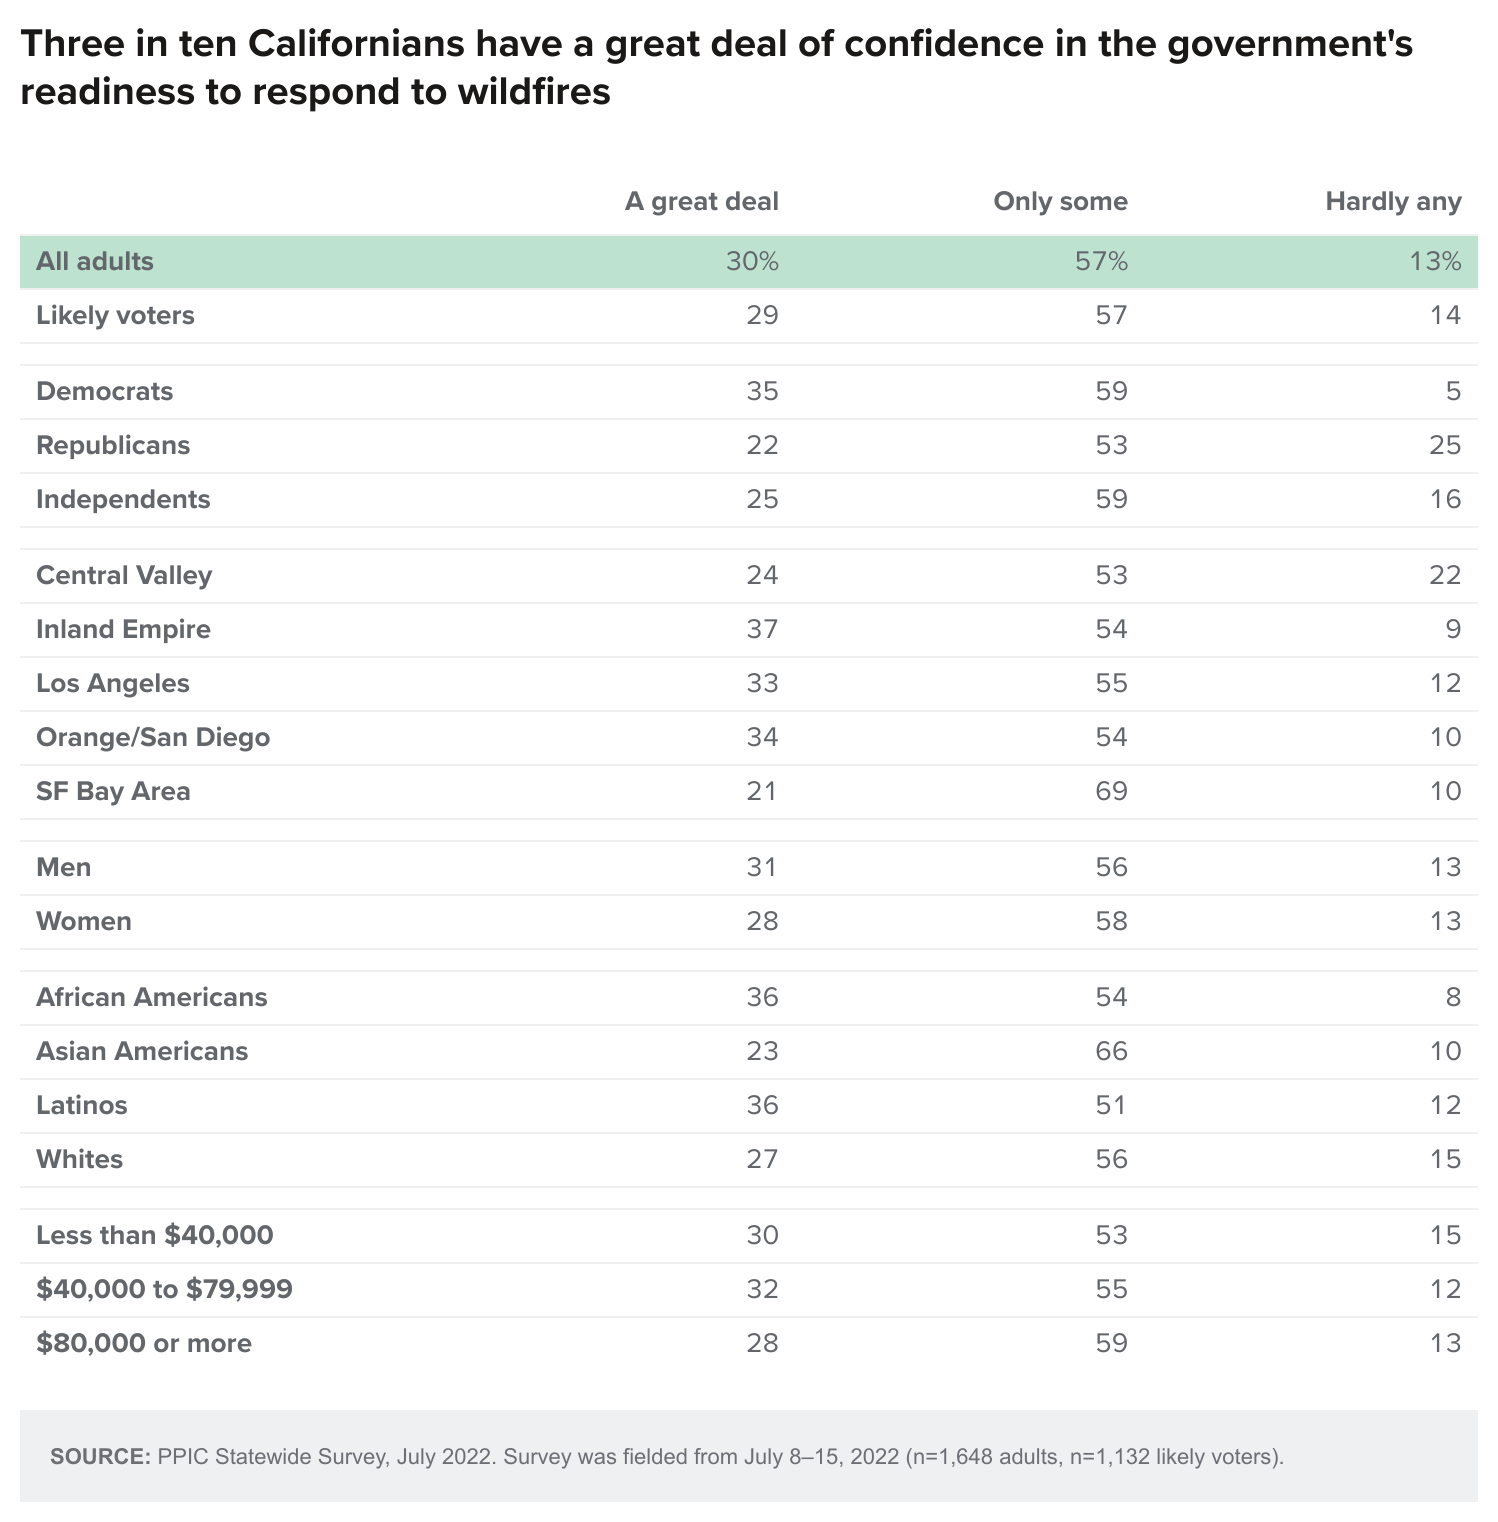 table - Three in ten Californians have a great deal of confidence in the government's readiness to respond to wildfires